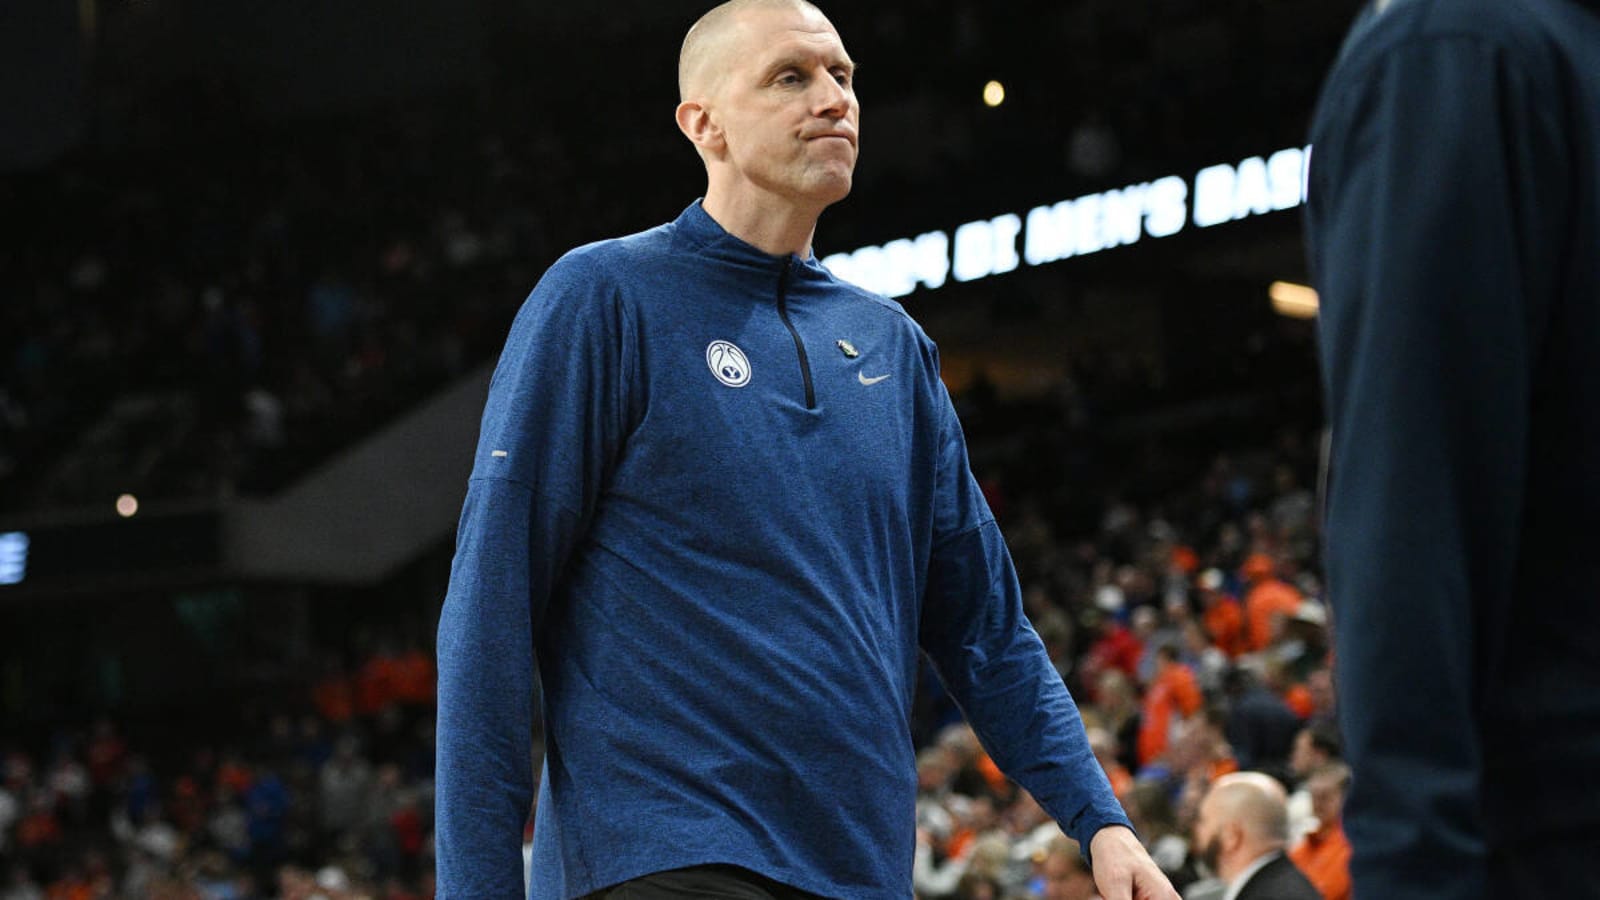 Kentucky Hires Former BYU Coach Mark Pope to Fill Vacancy